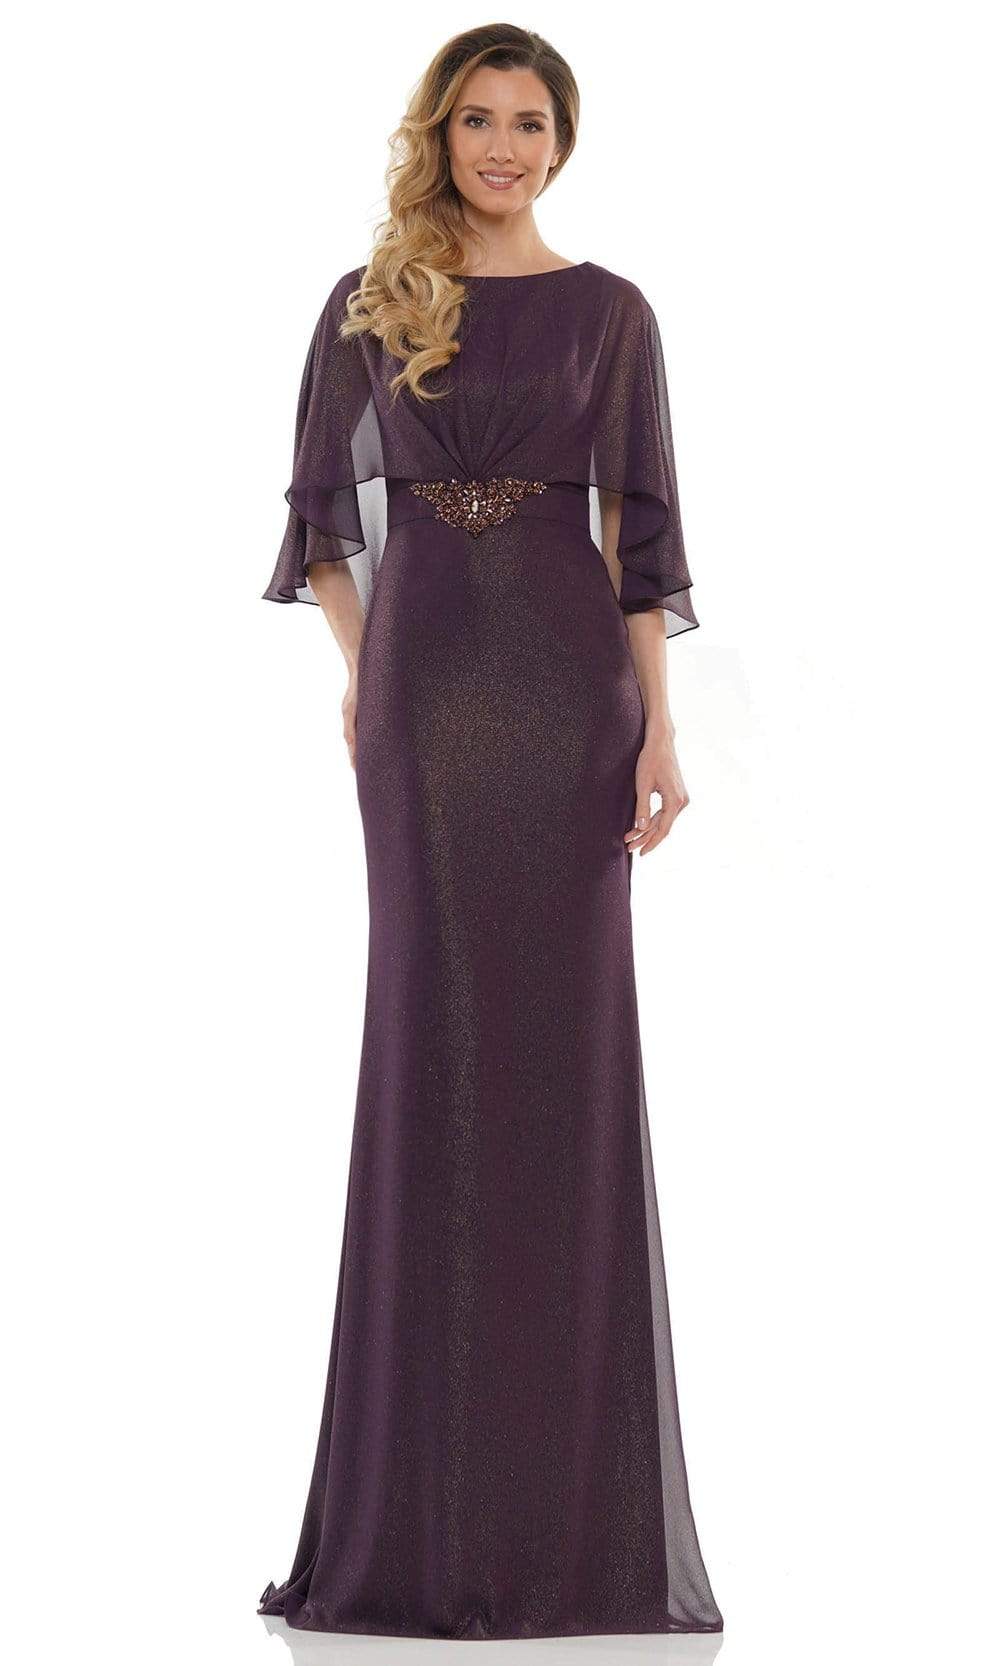 Marsoni by Colors - MV1130 Glittered Fabric Poncho Sheath Gown Mother of the Bride Dresses 4 / Eggplant